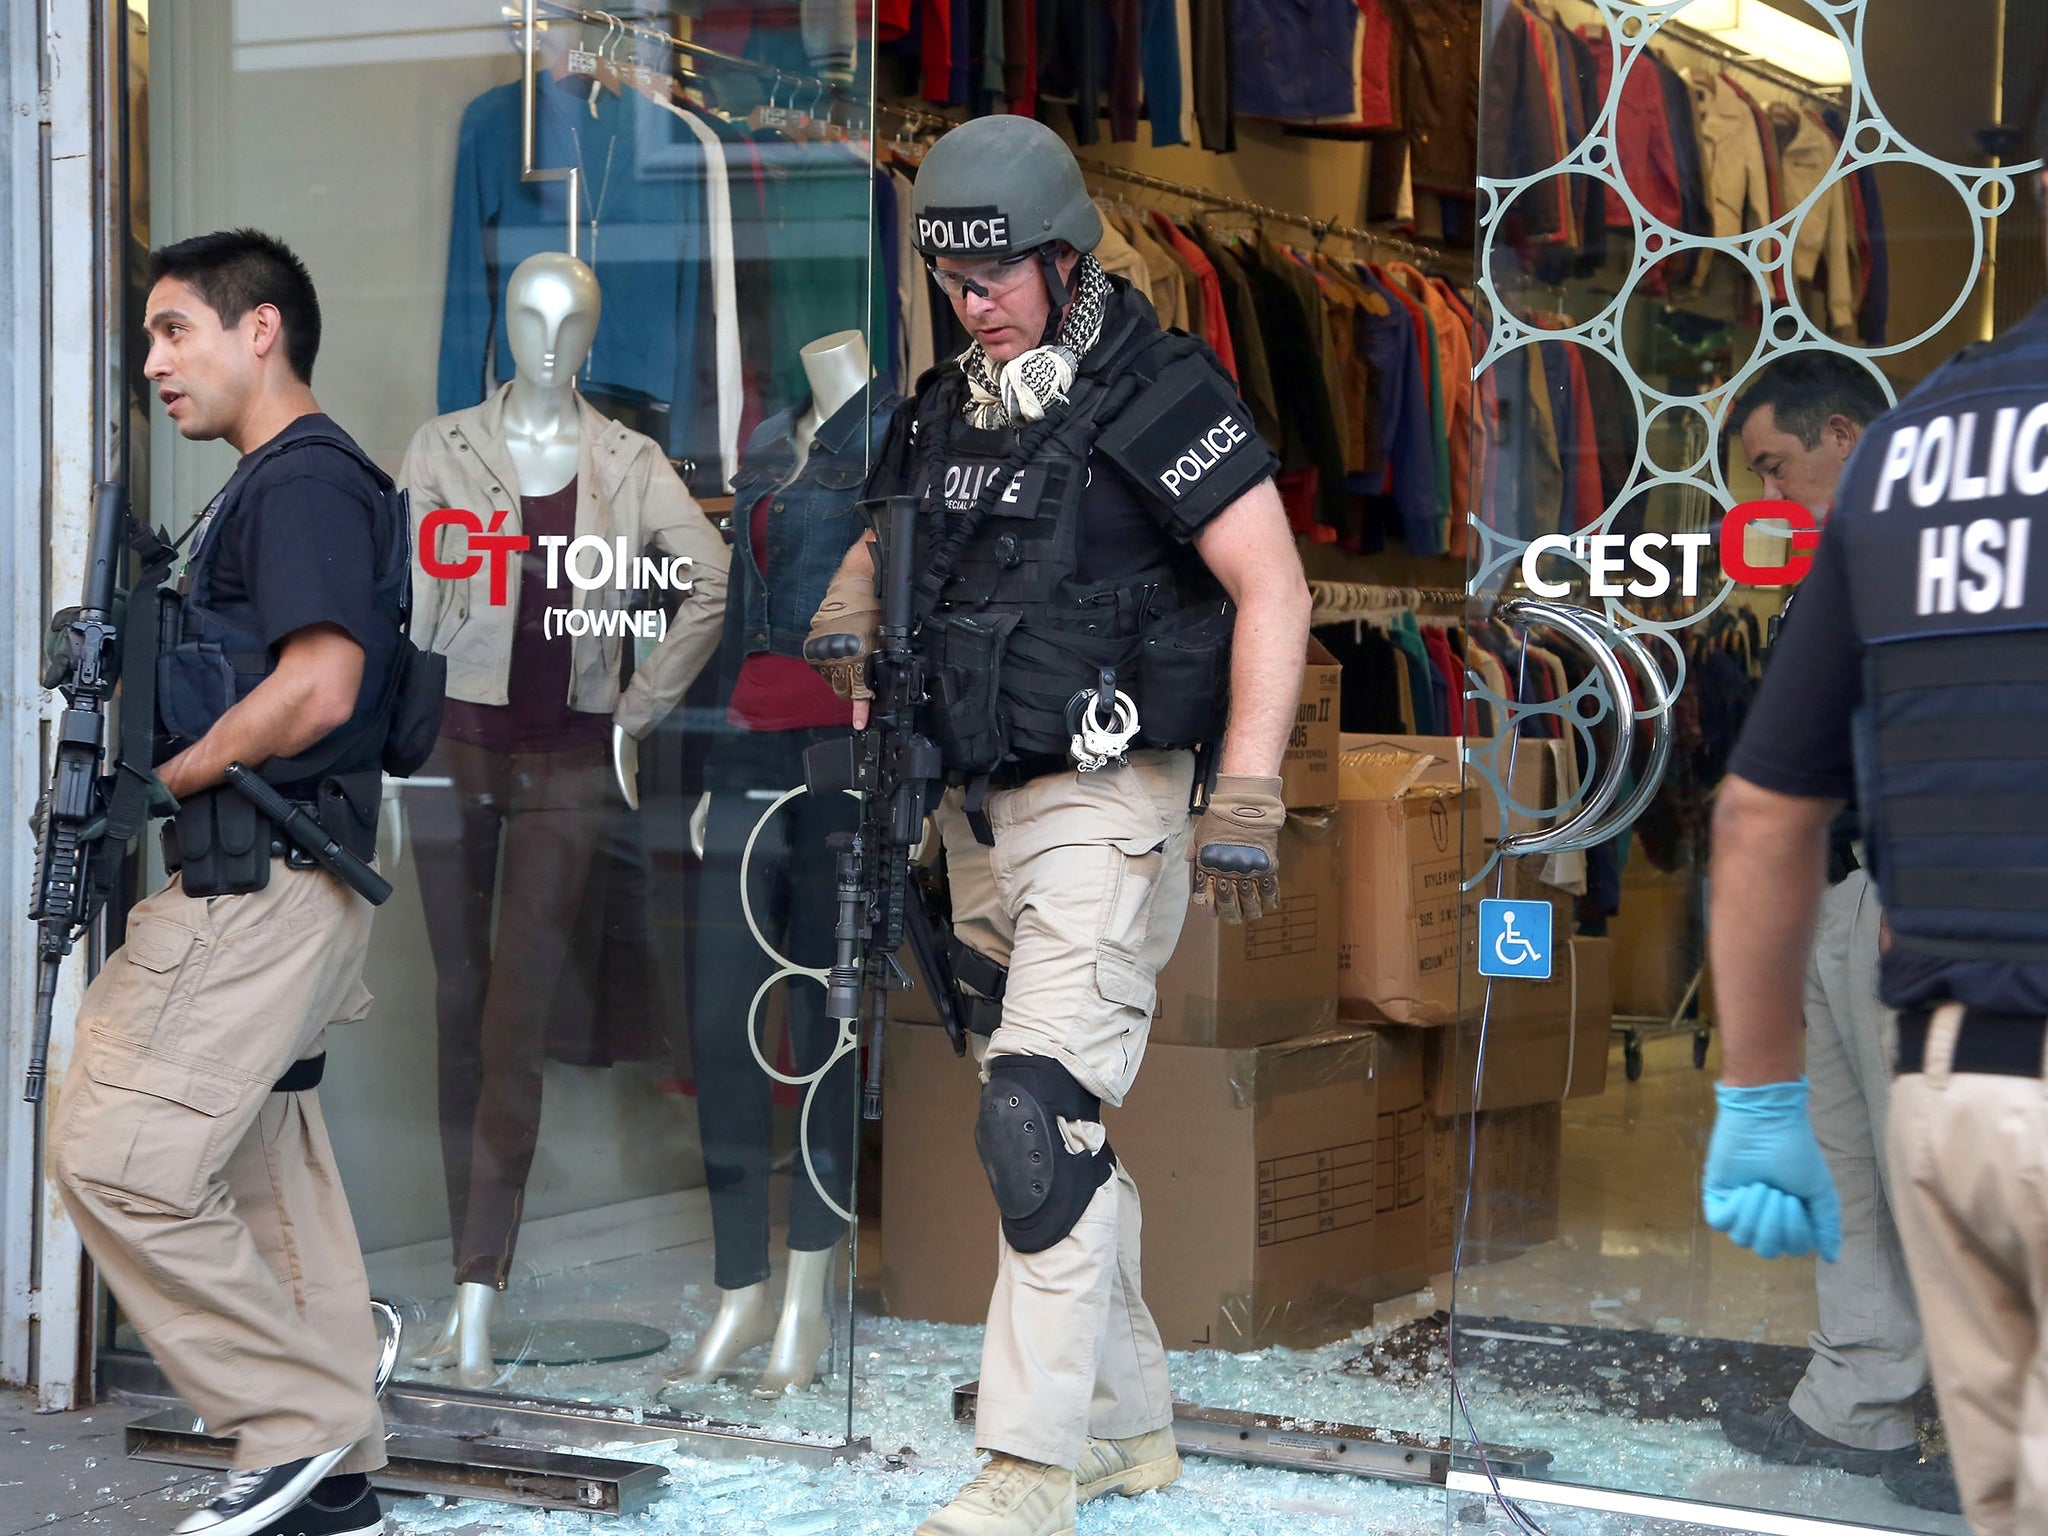 Undercover agents raided dozens of businesses in the fashion district of Los Angeles this week